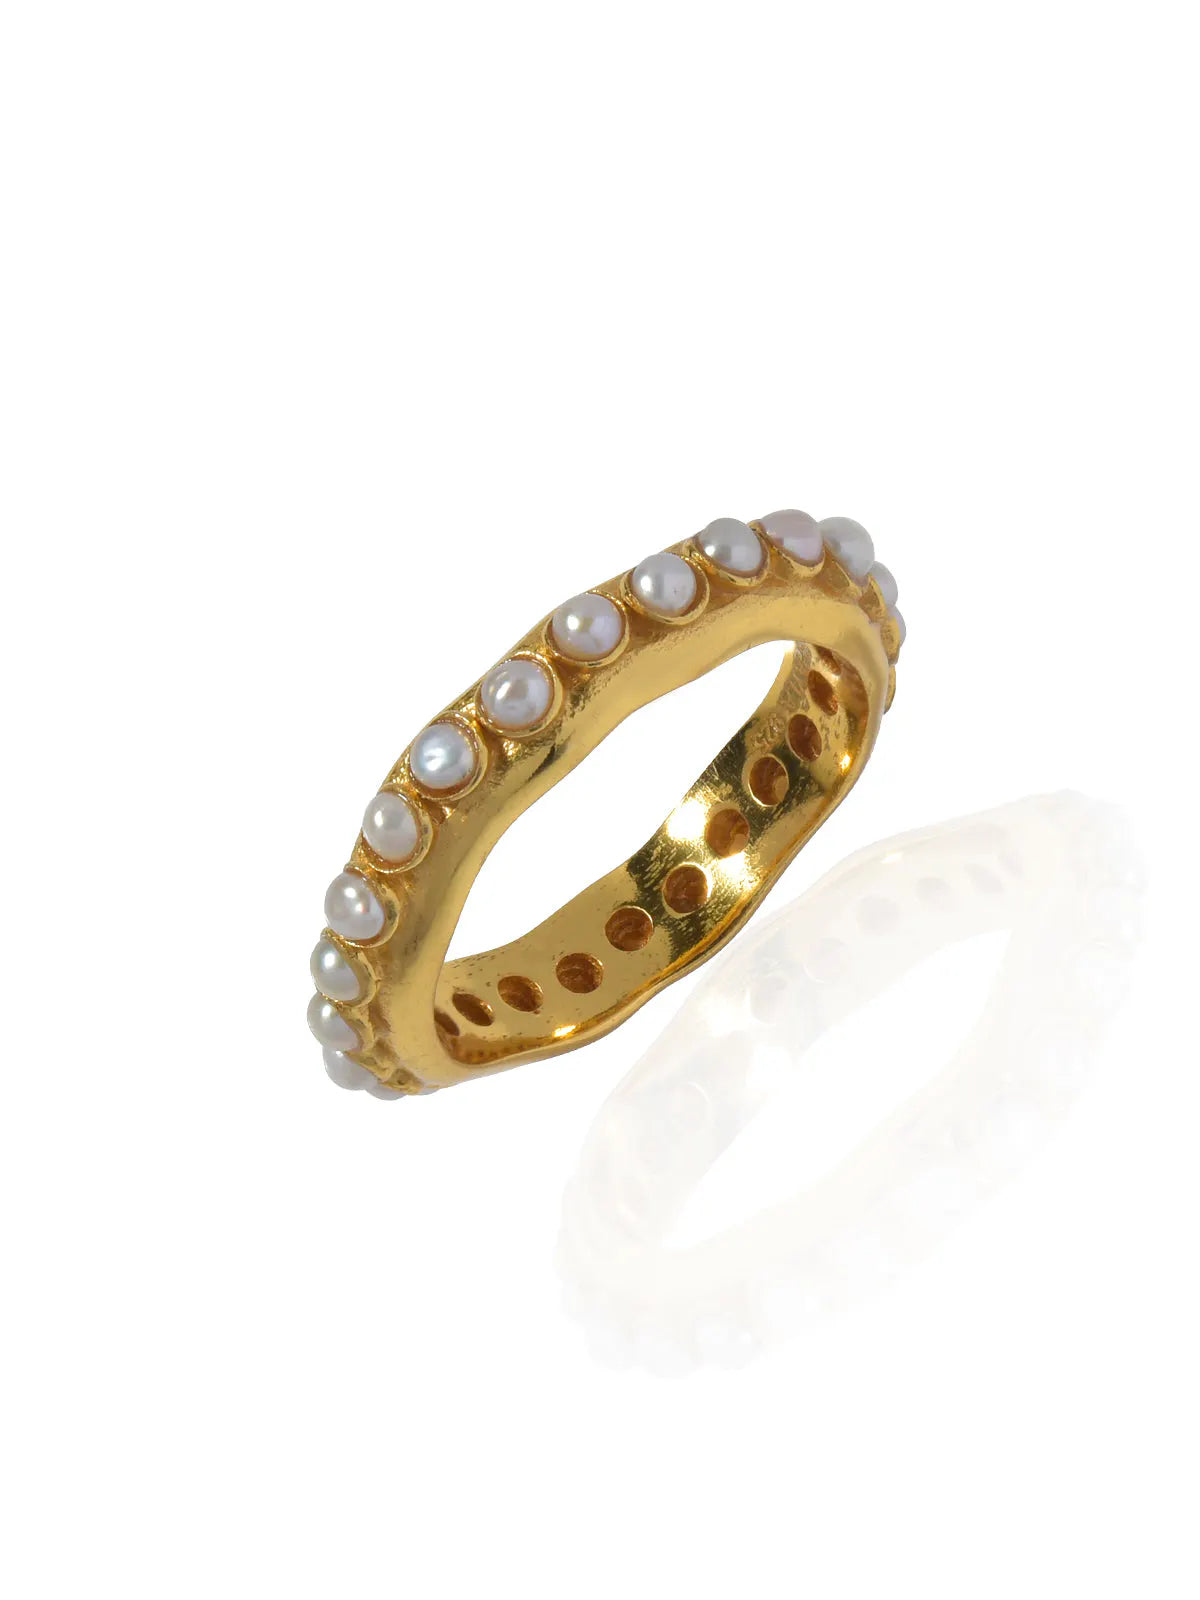 A unique SHYLA - Astri Ring Pearl - Gold handcrafted with pearls on it.